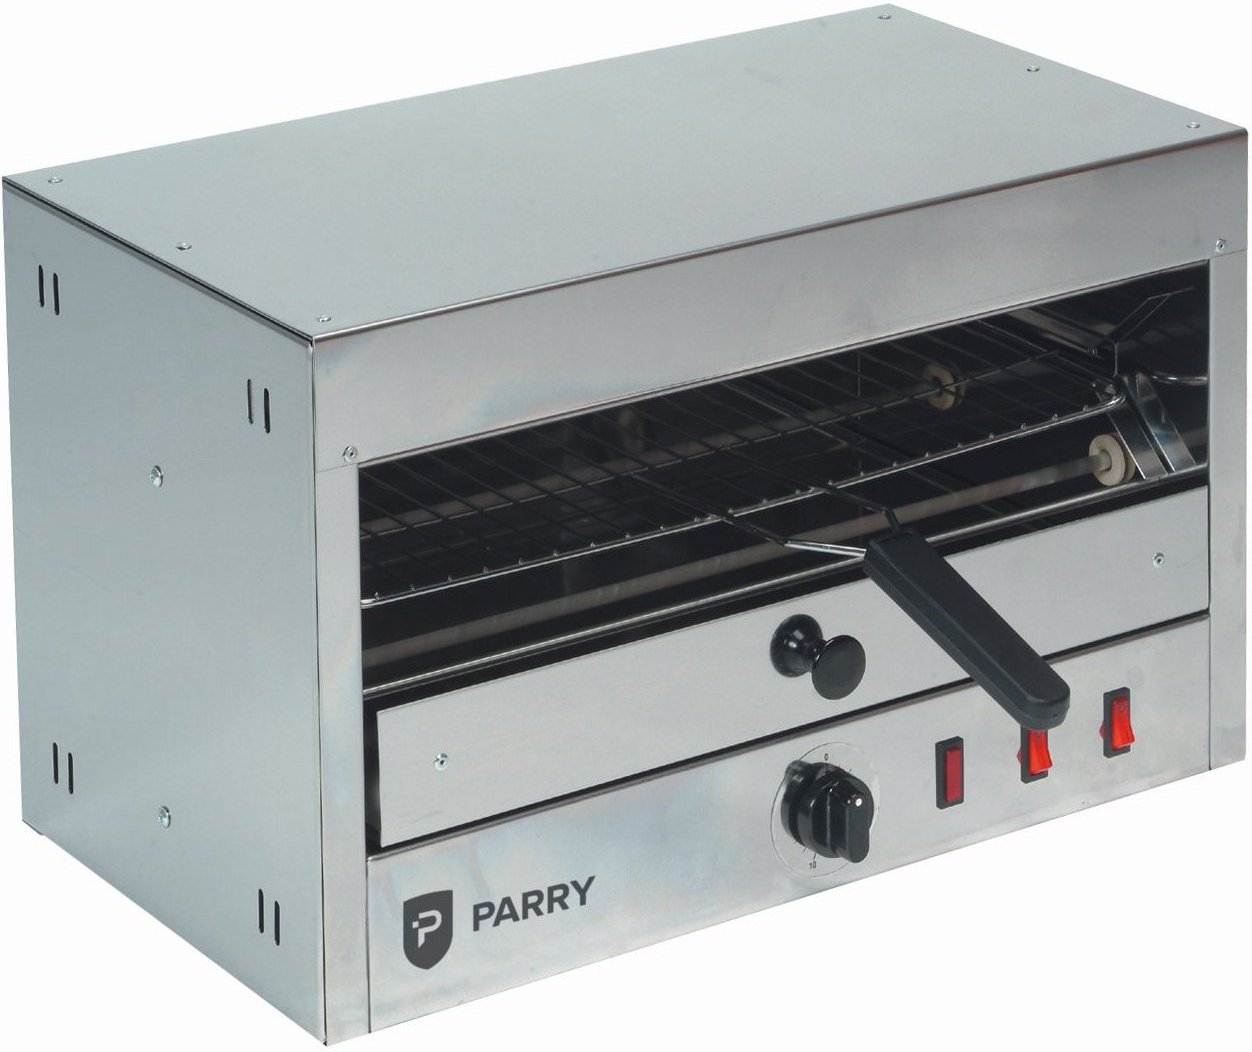 Parry Electric Grills